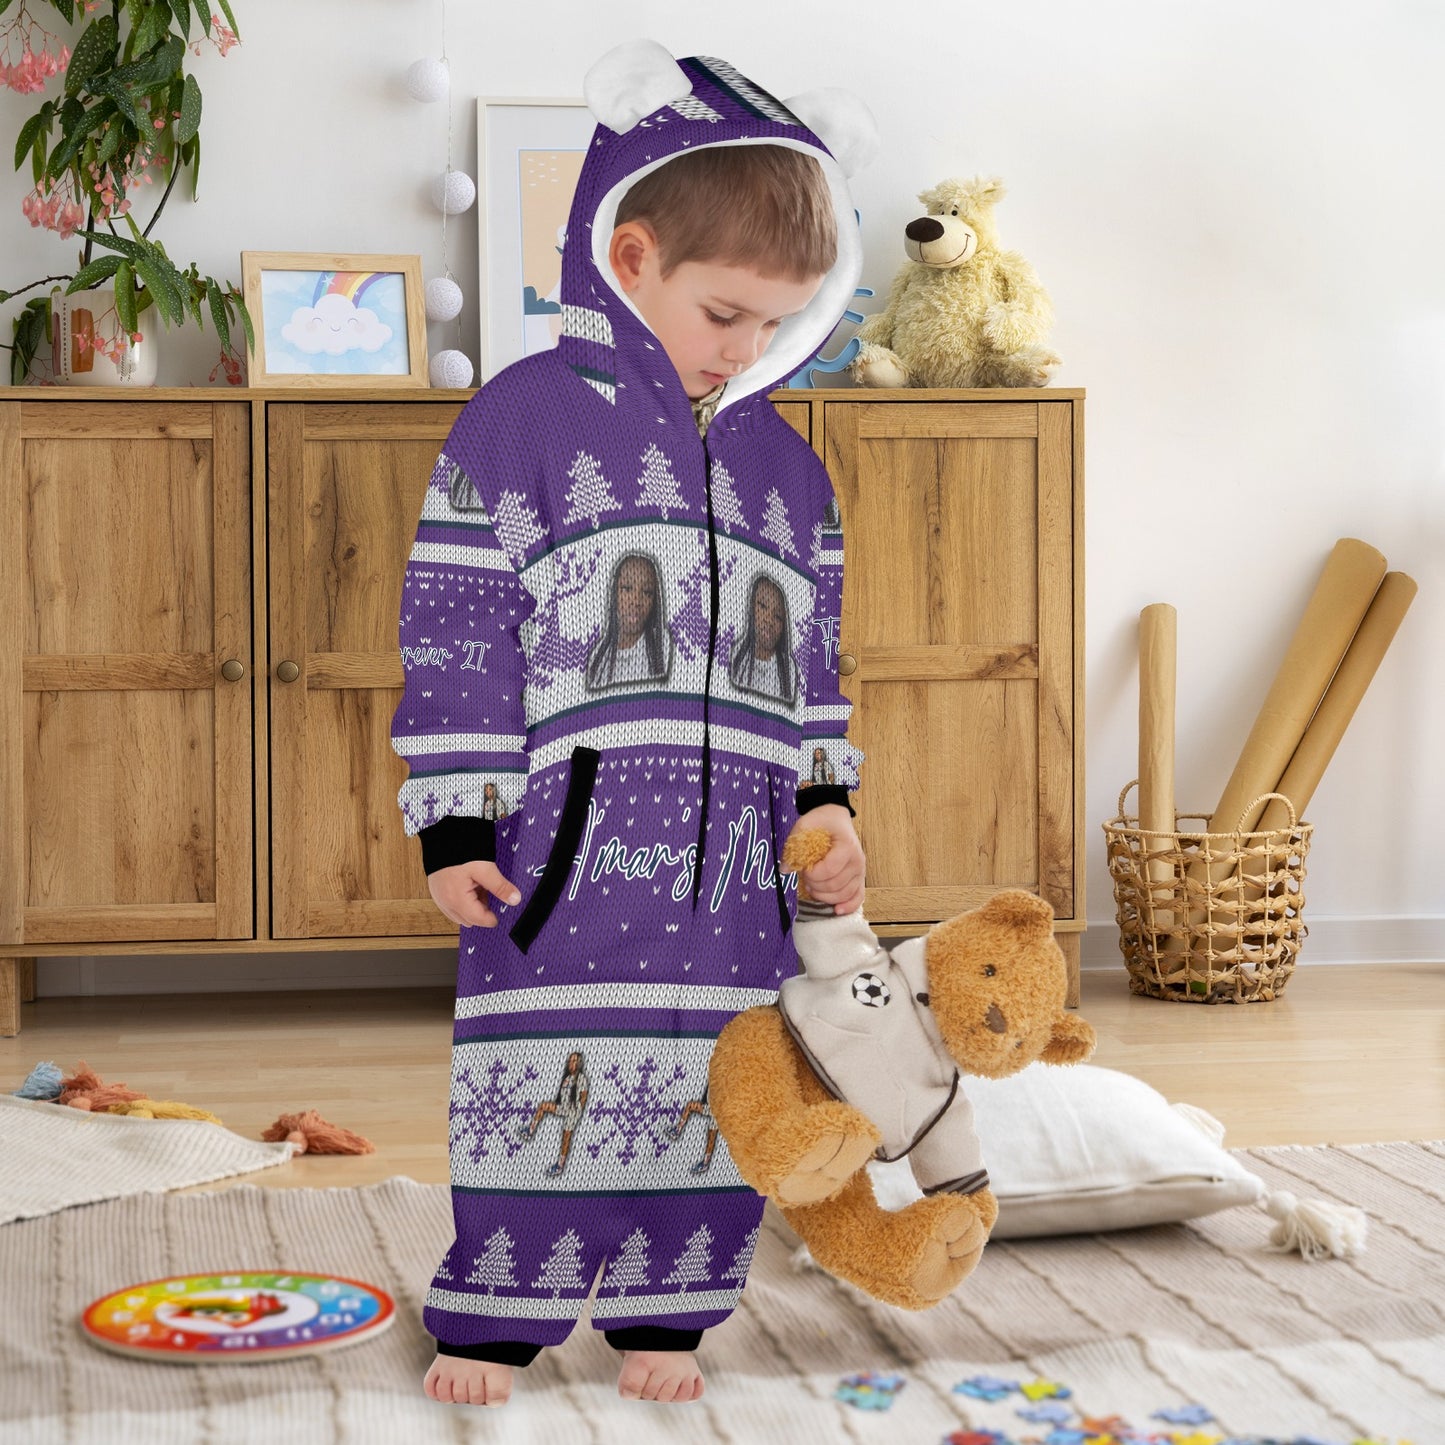 Kayla One-Piece Zip up Hooded Pajamas for Little Kids